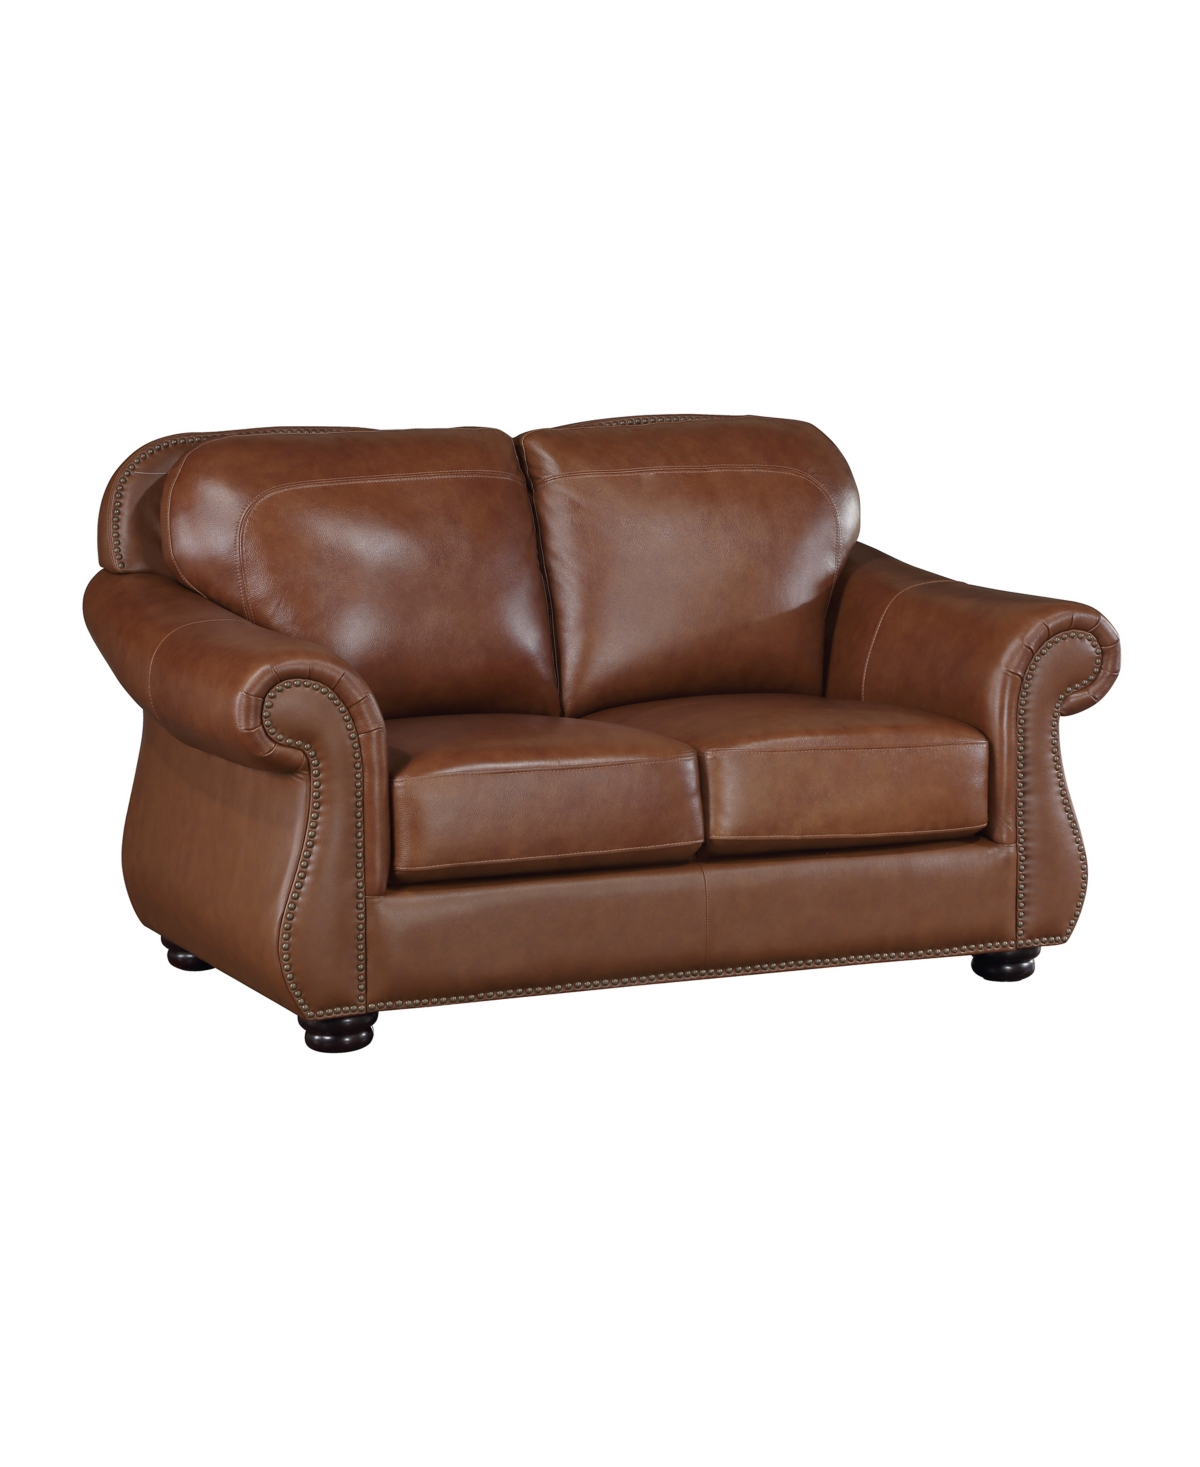 Homelegance White Label Dadeville 64" Leather Match Love Seat In Camel Brown